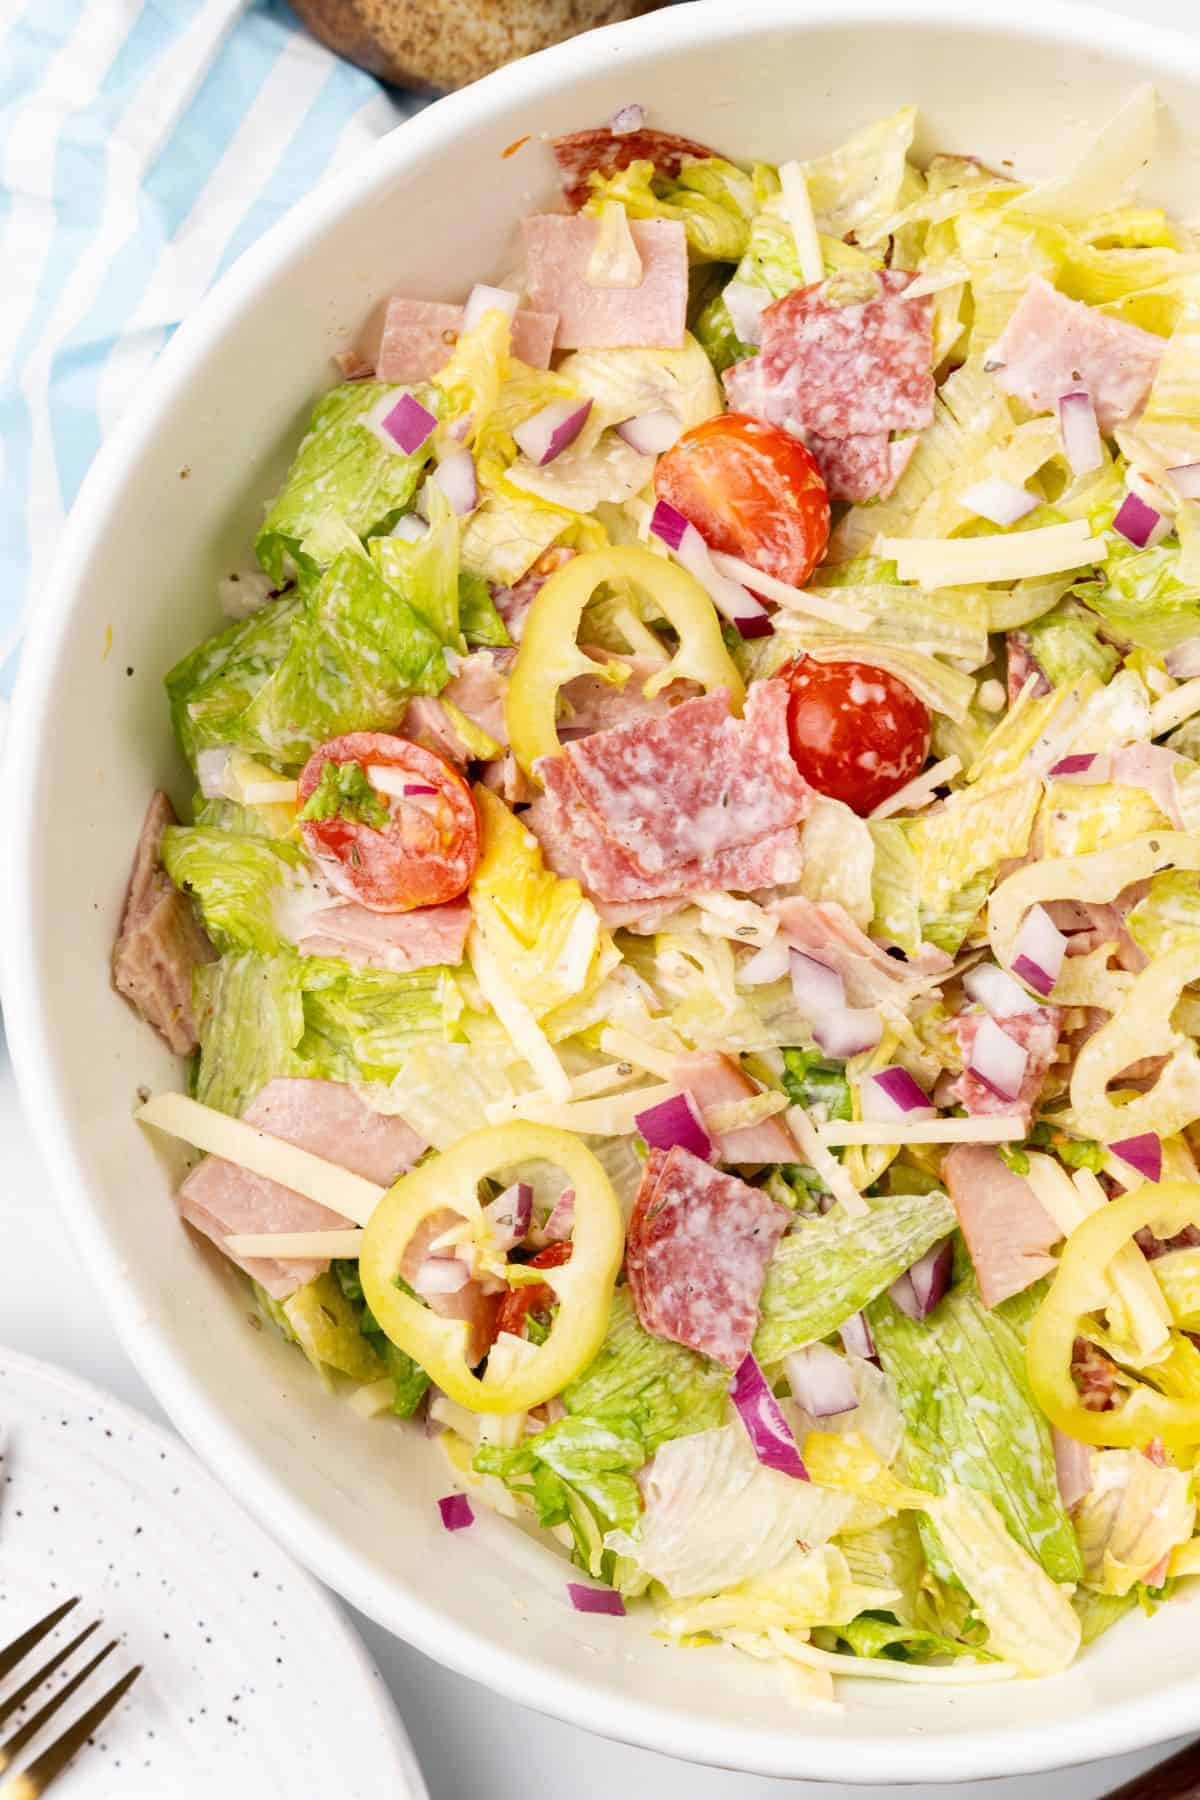 A grinder salad topped with ham, salami, and tomatoes.